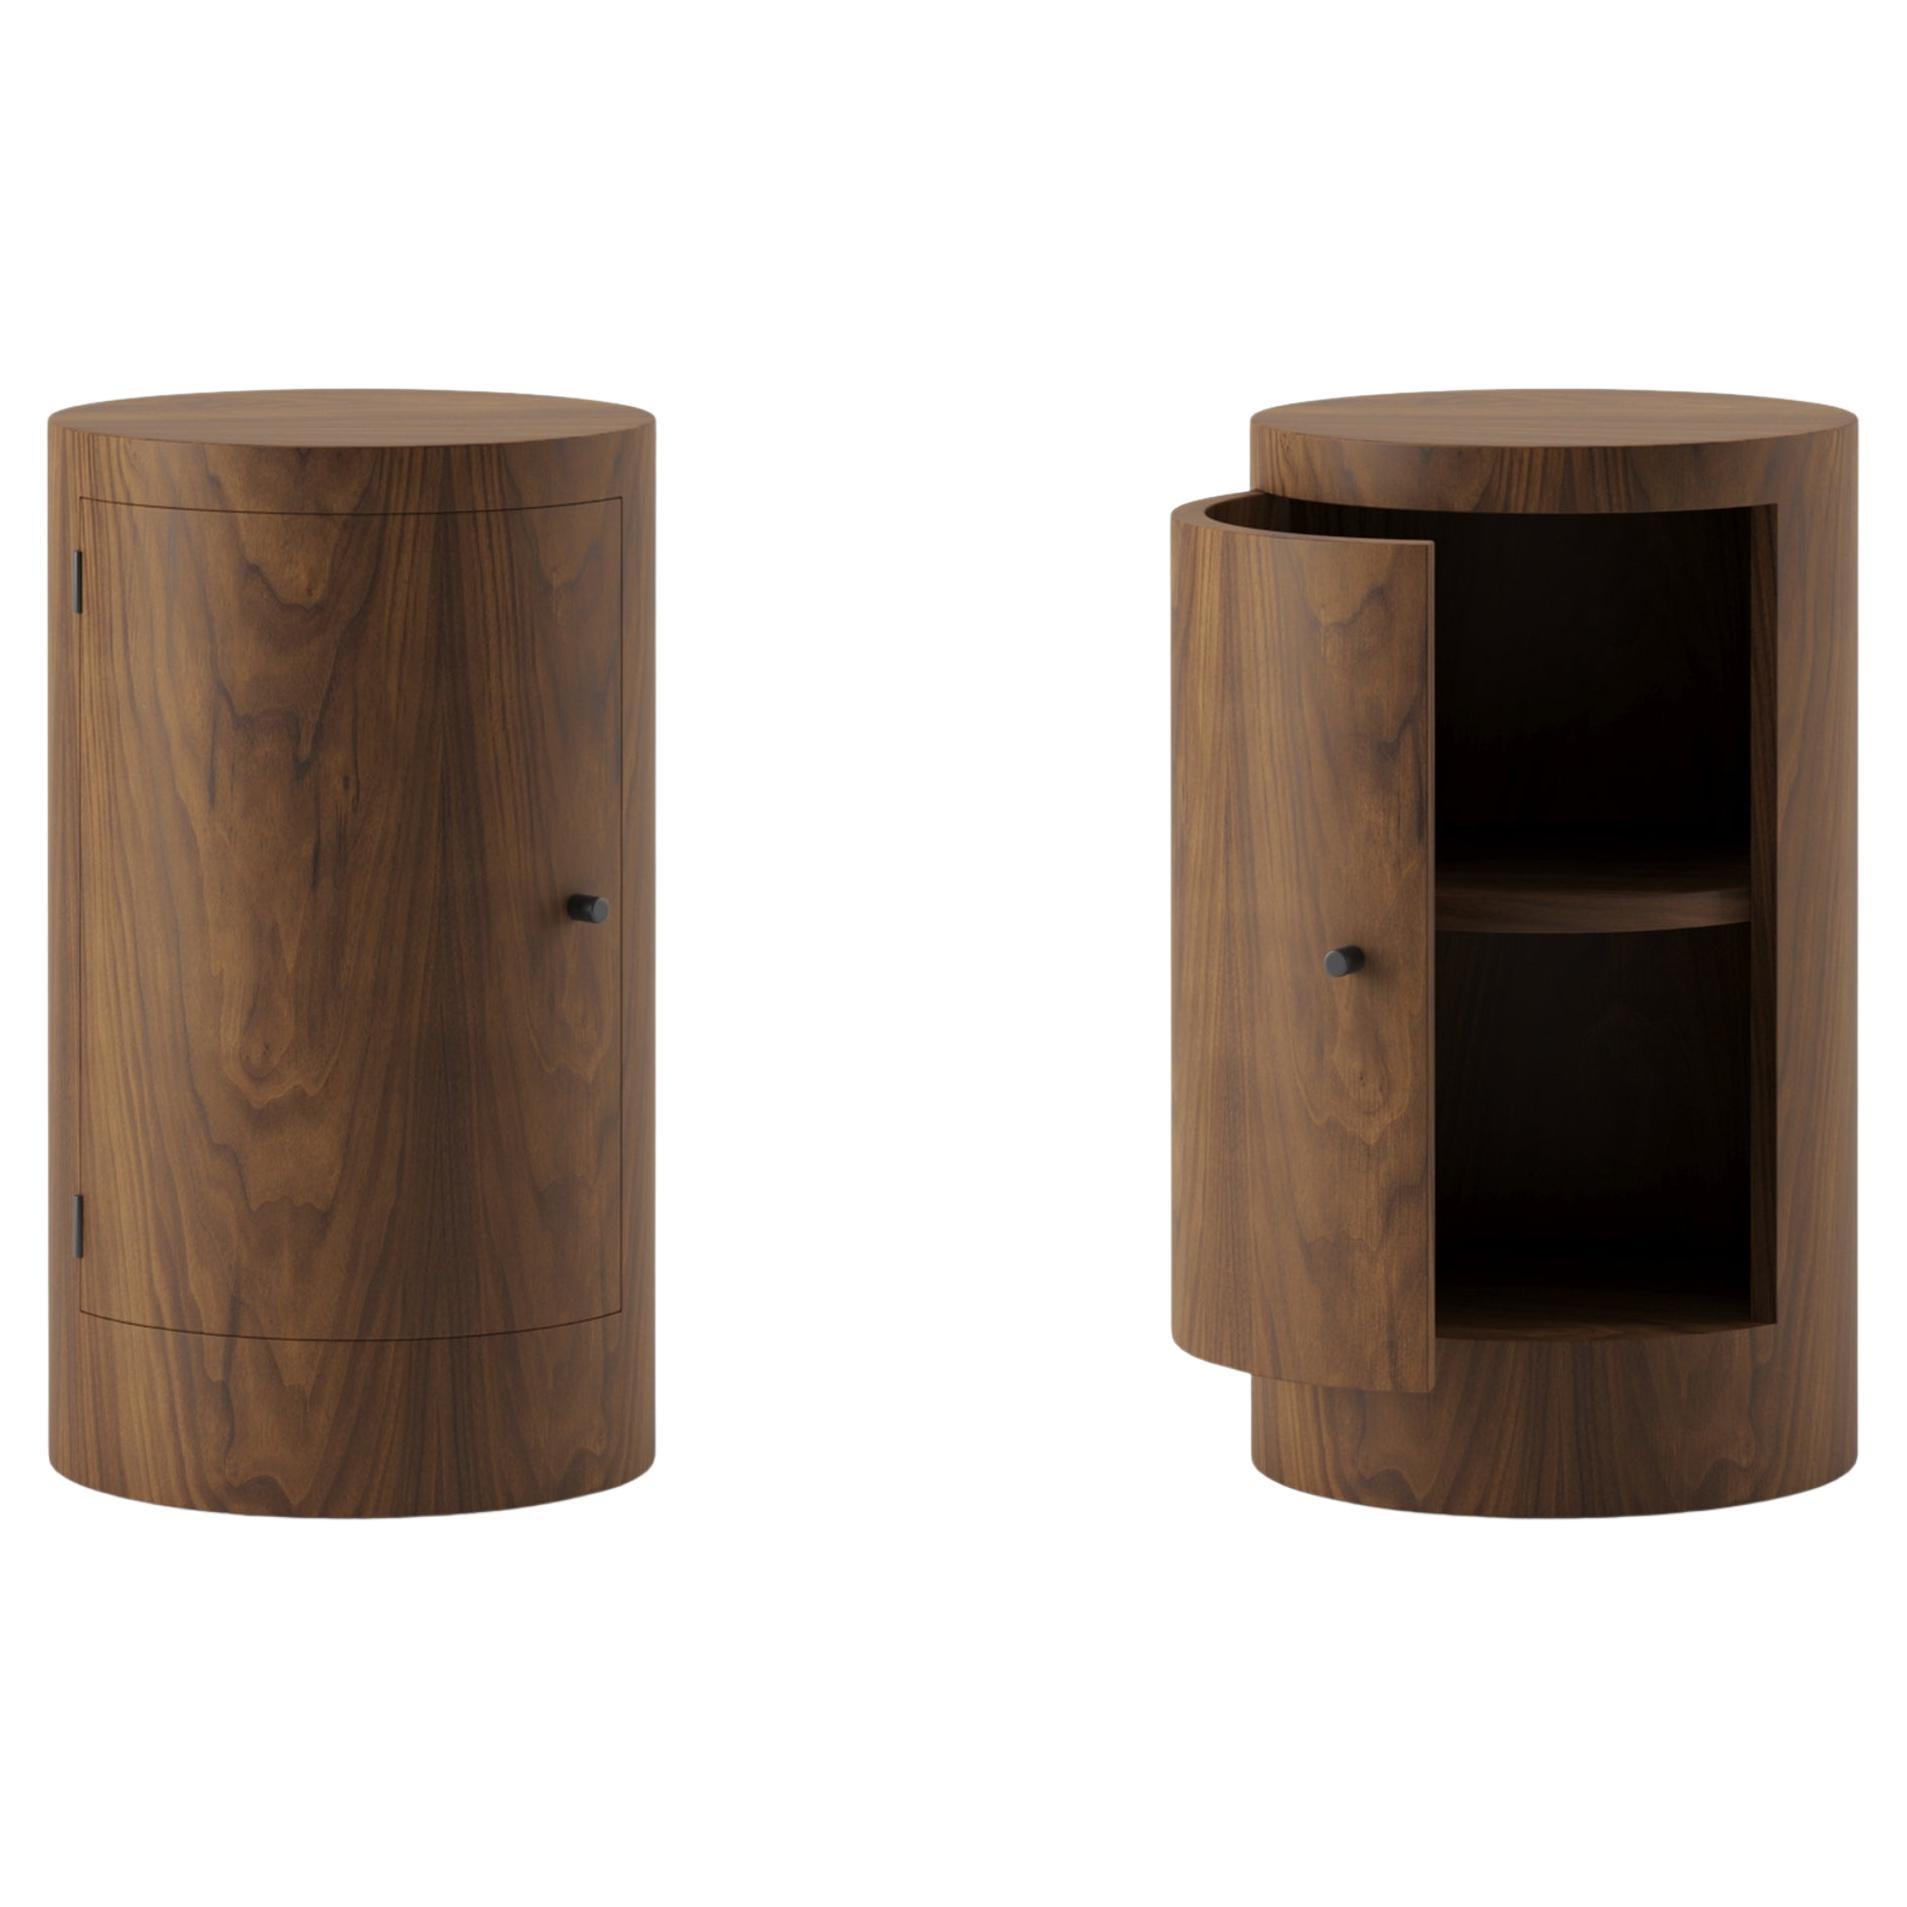 Pair of Constant Night Stands in Iroko Wood by Master Studio for Lemon ...